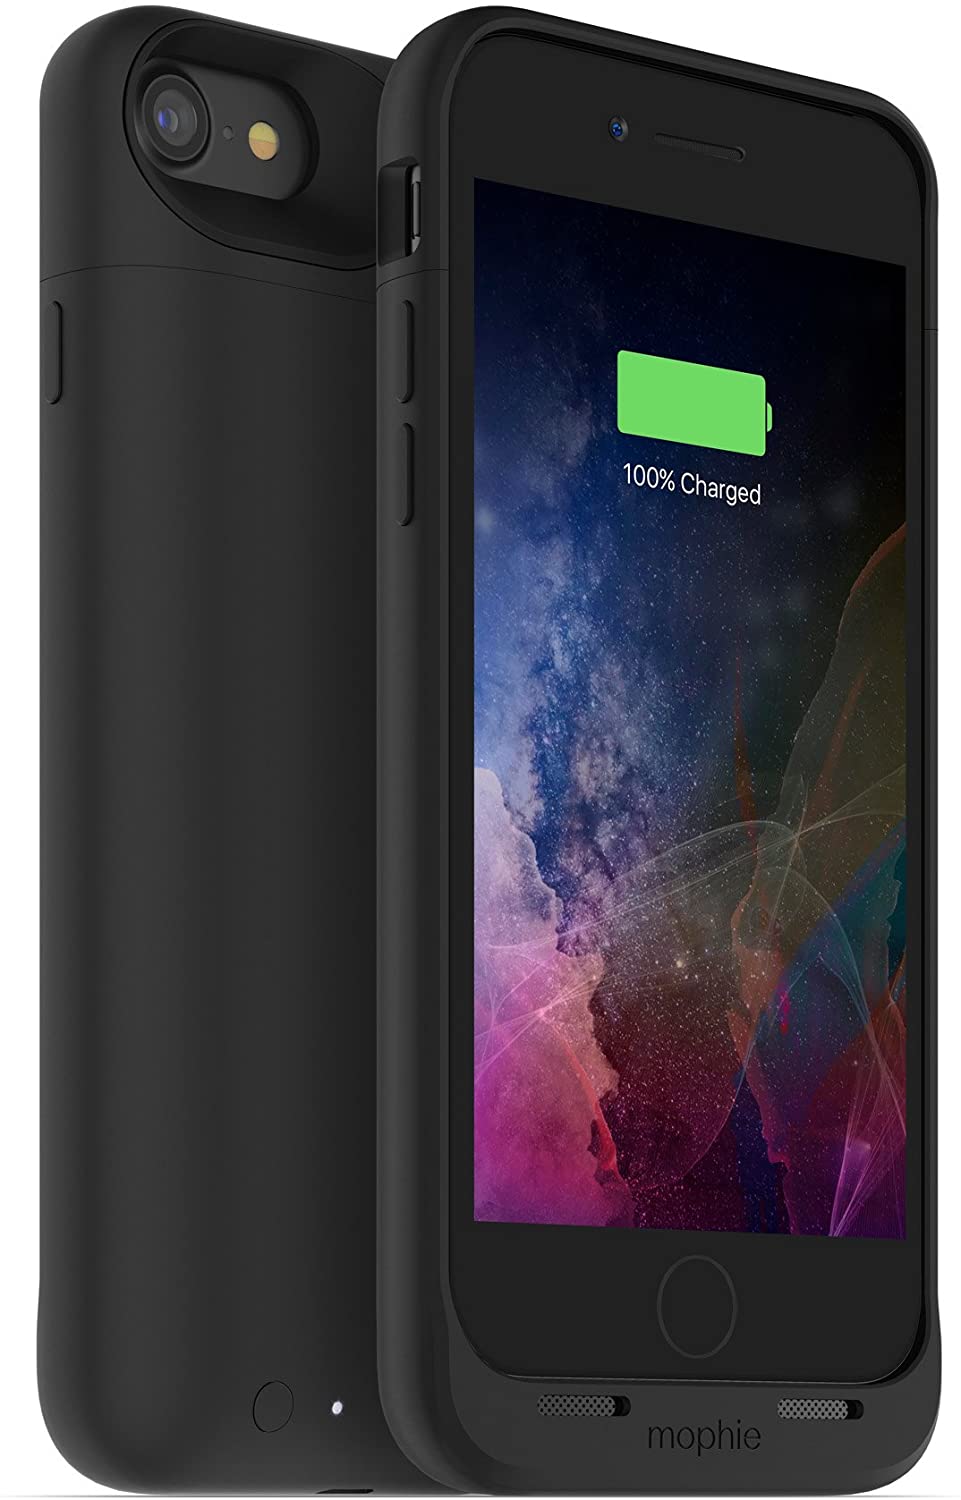 portable battery charger that's wireless